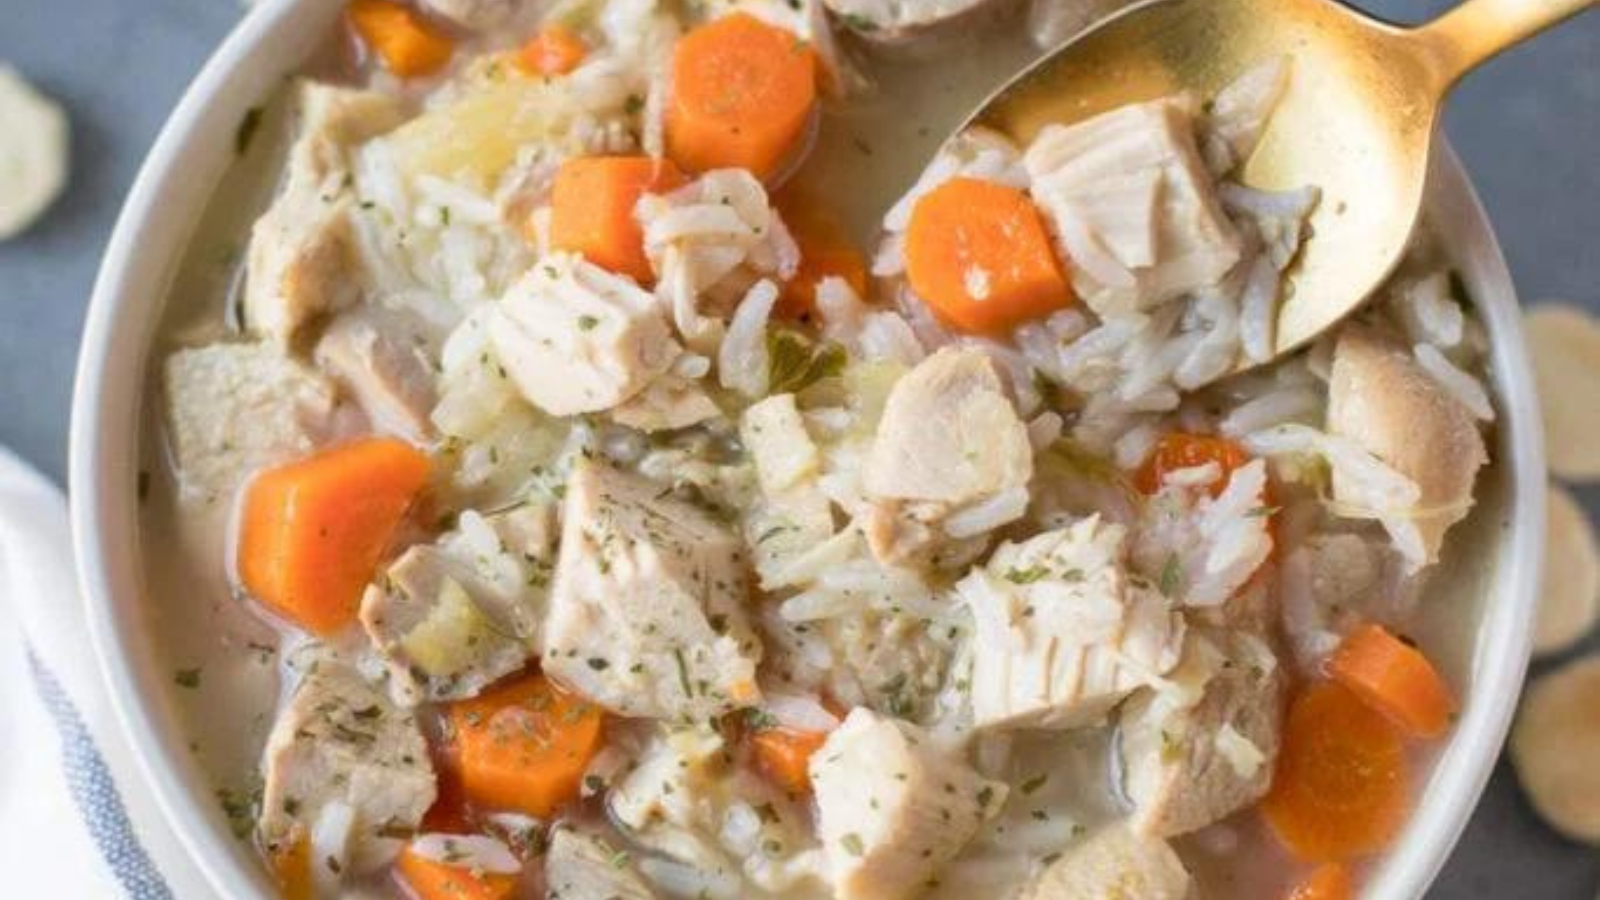 A bowl of turkey, carrot and rice soup.